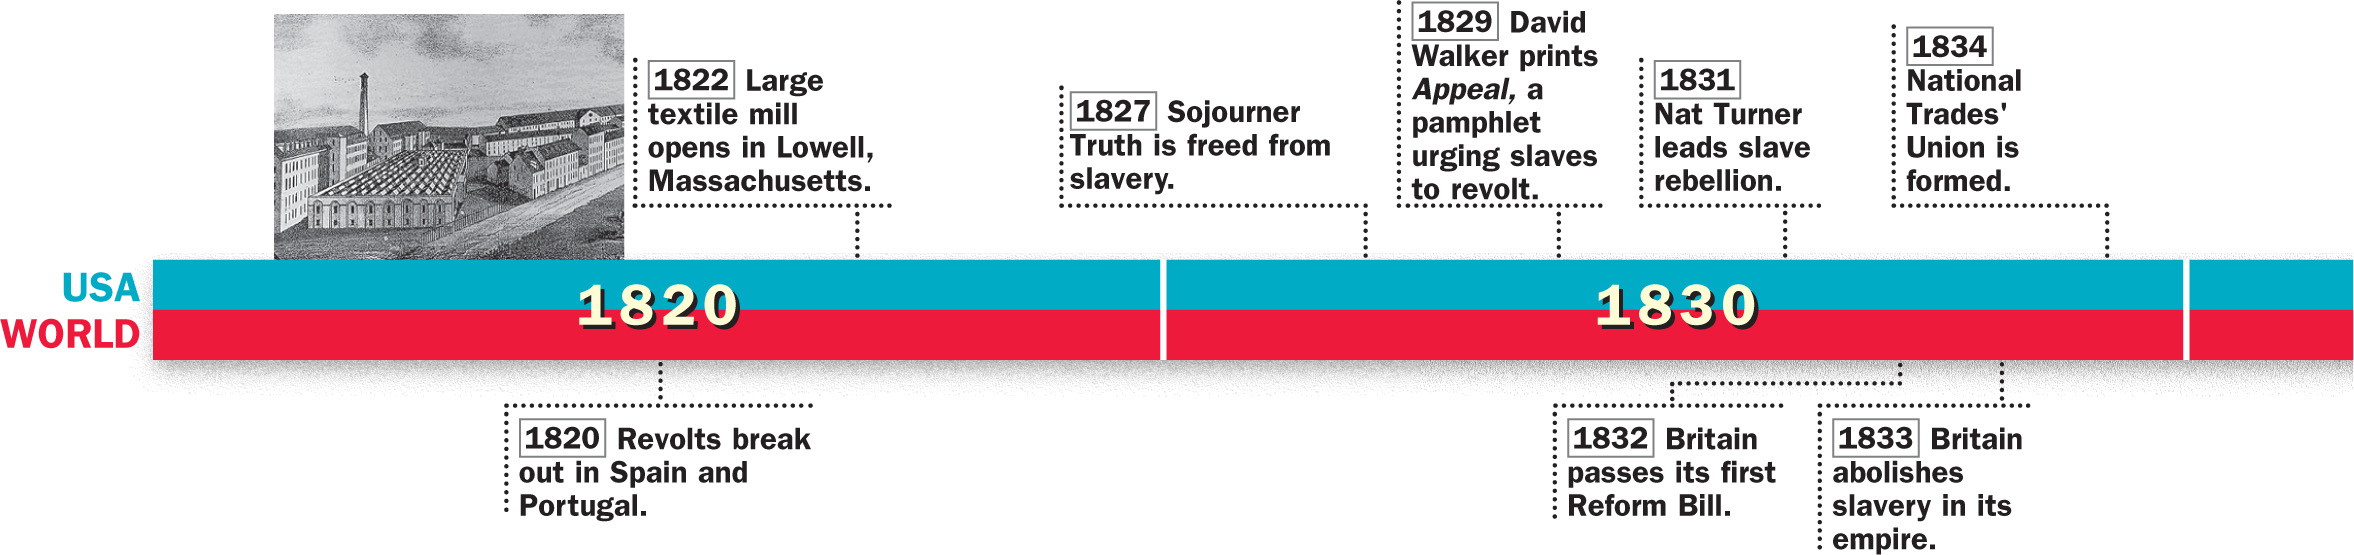 A timeline of historical events
from 1820 to 1850 in both the U.S. and the world